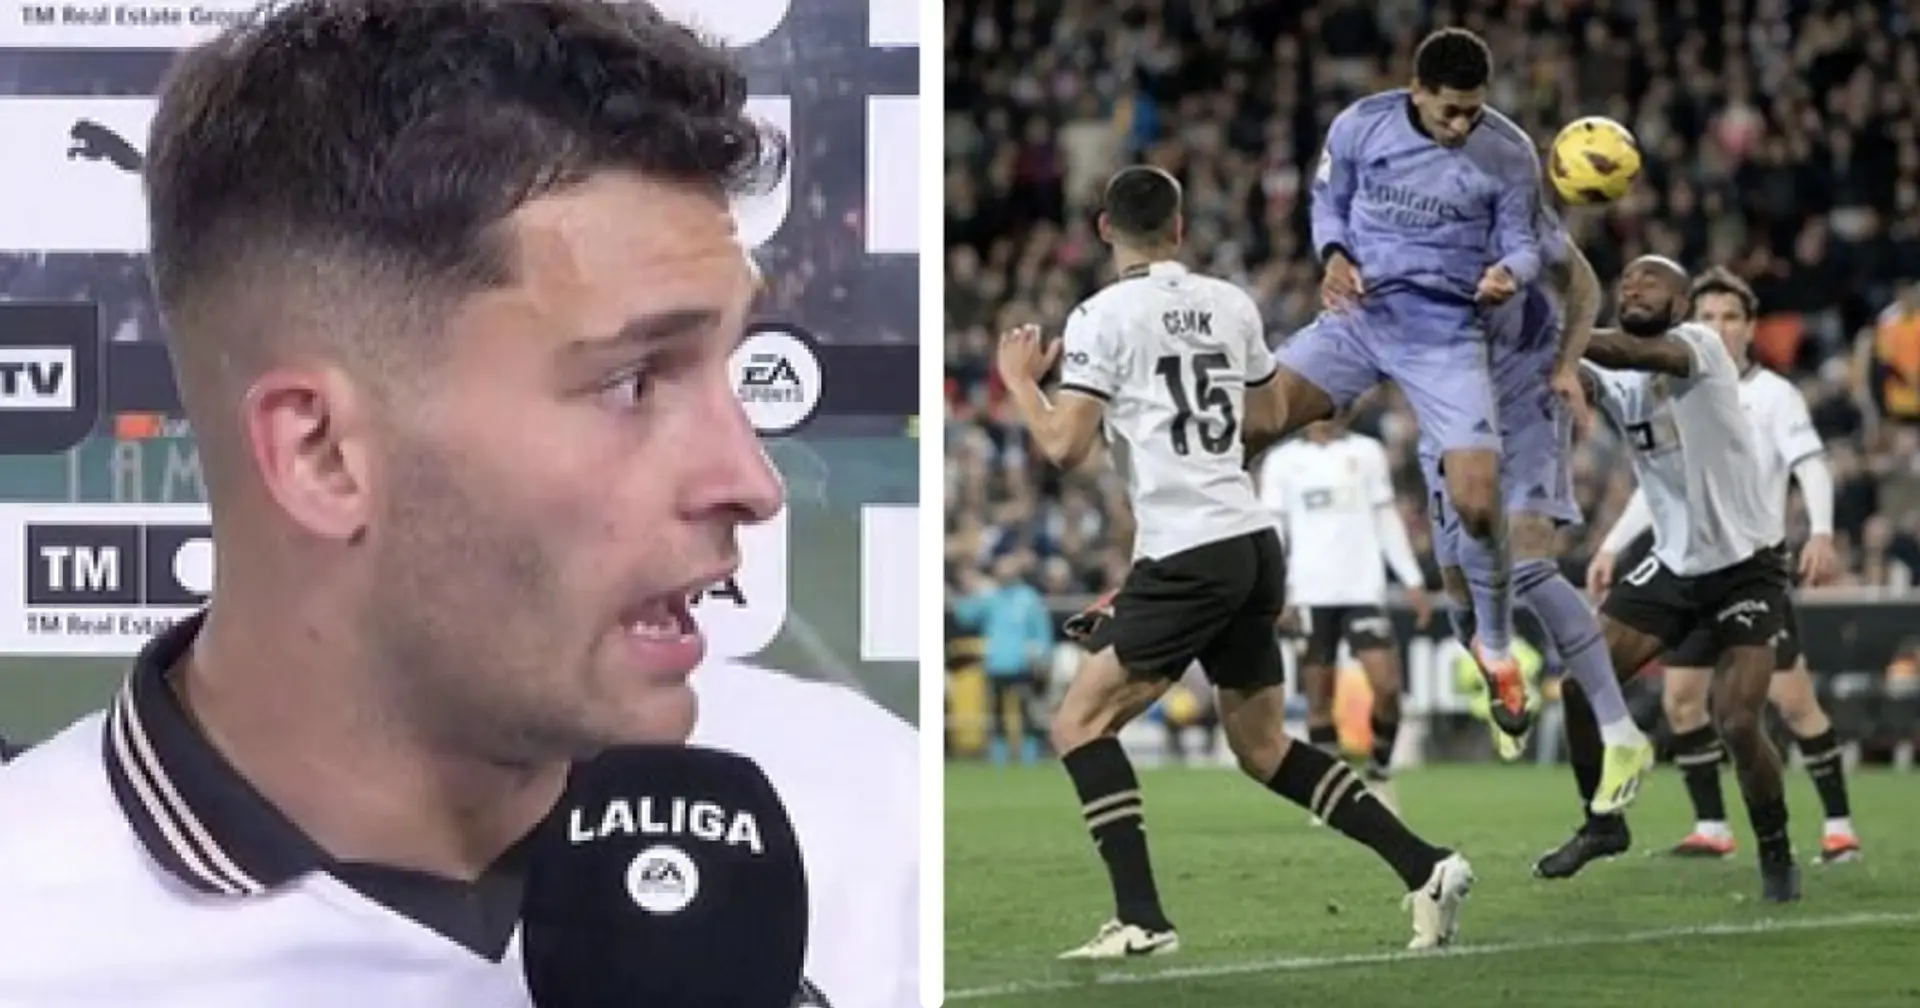 Valencia striker admits referee should've counted Real Madrid's last-second goal